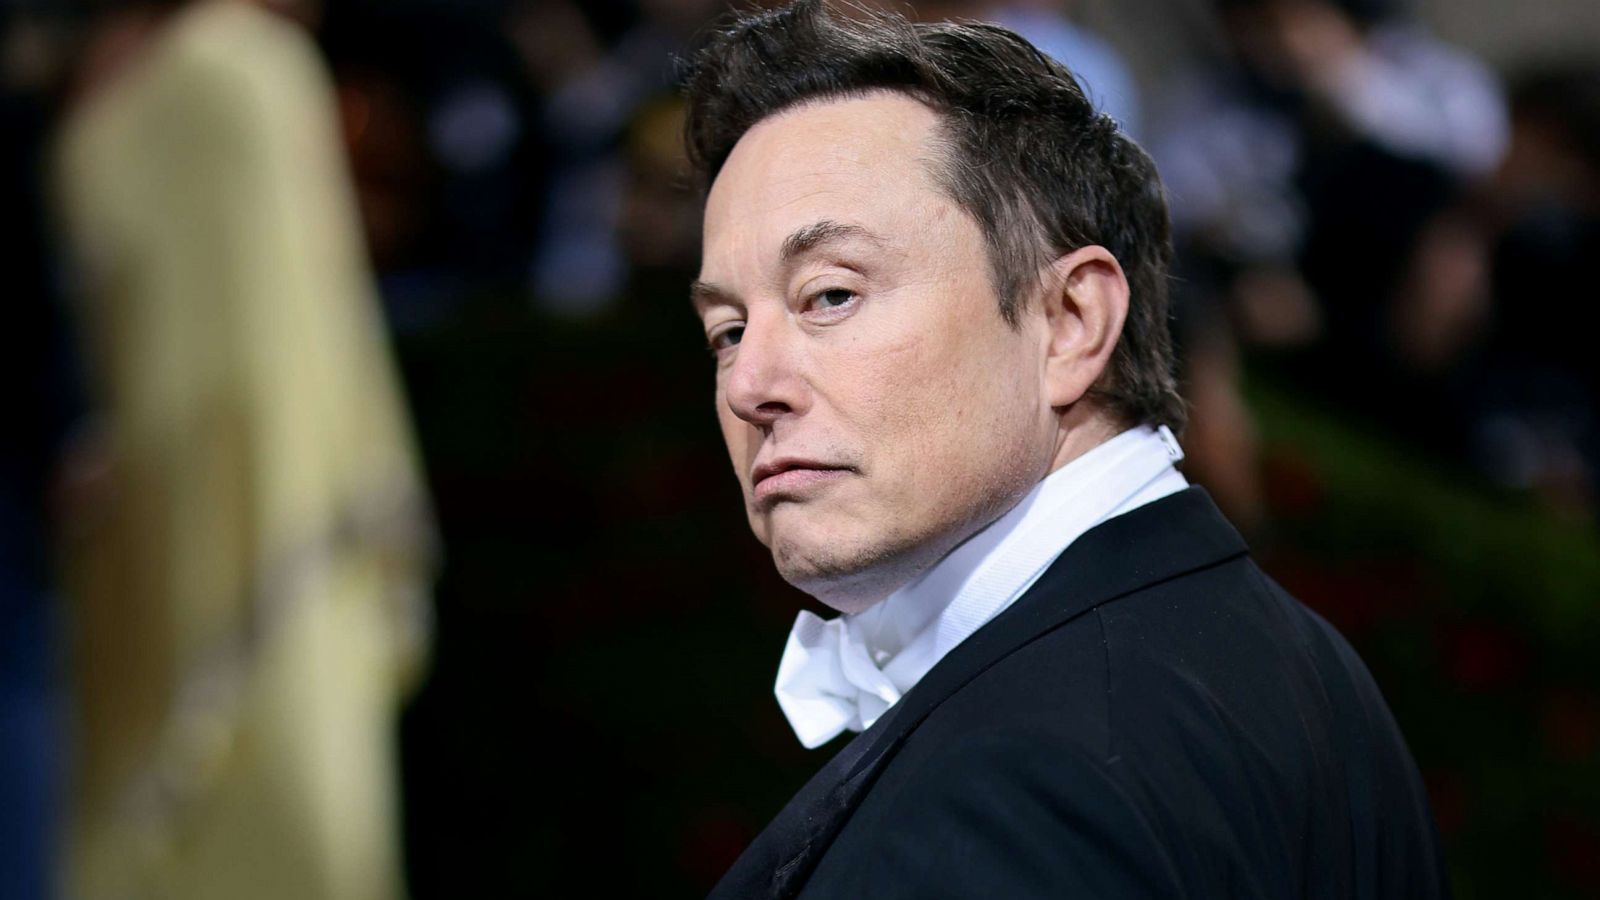 Chief Executive Officer of Twitter Elon Musk proposes to reinstate nearly everyone Twitter banned